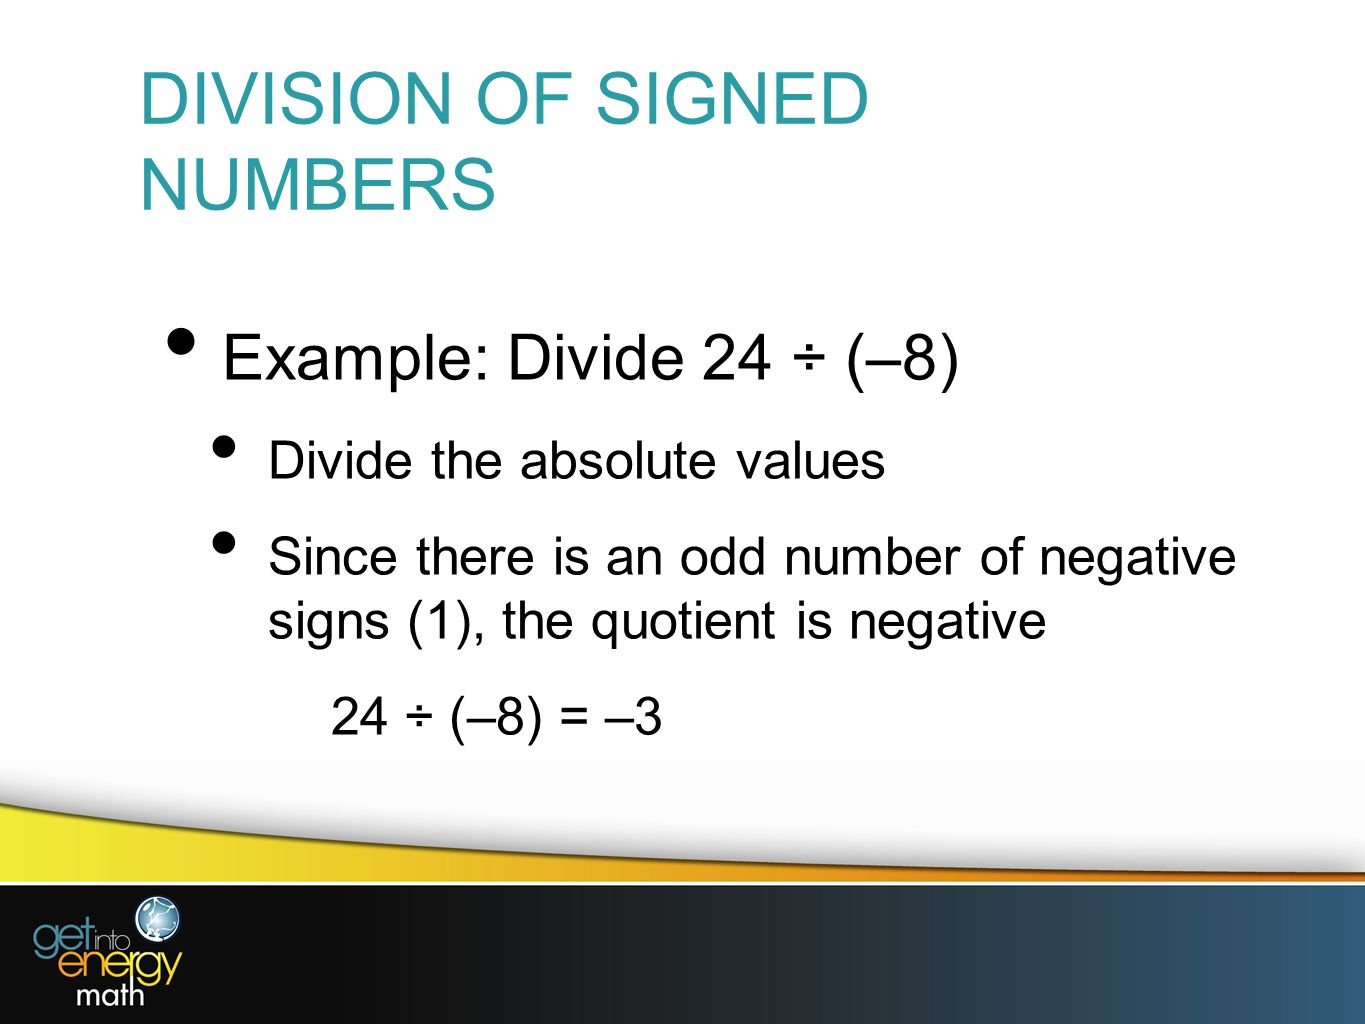 DIVISION OF SIGNED NUMBERS